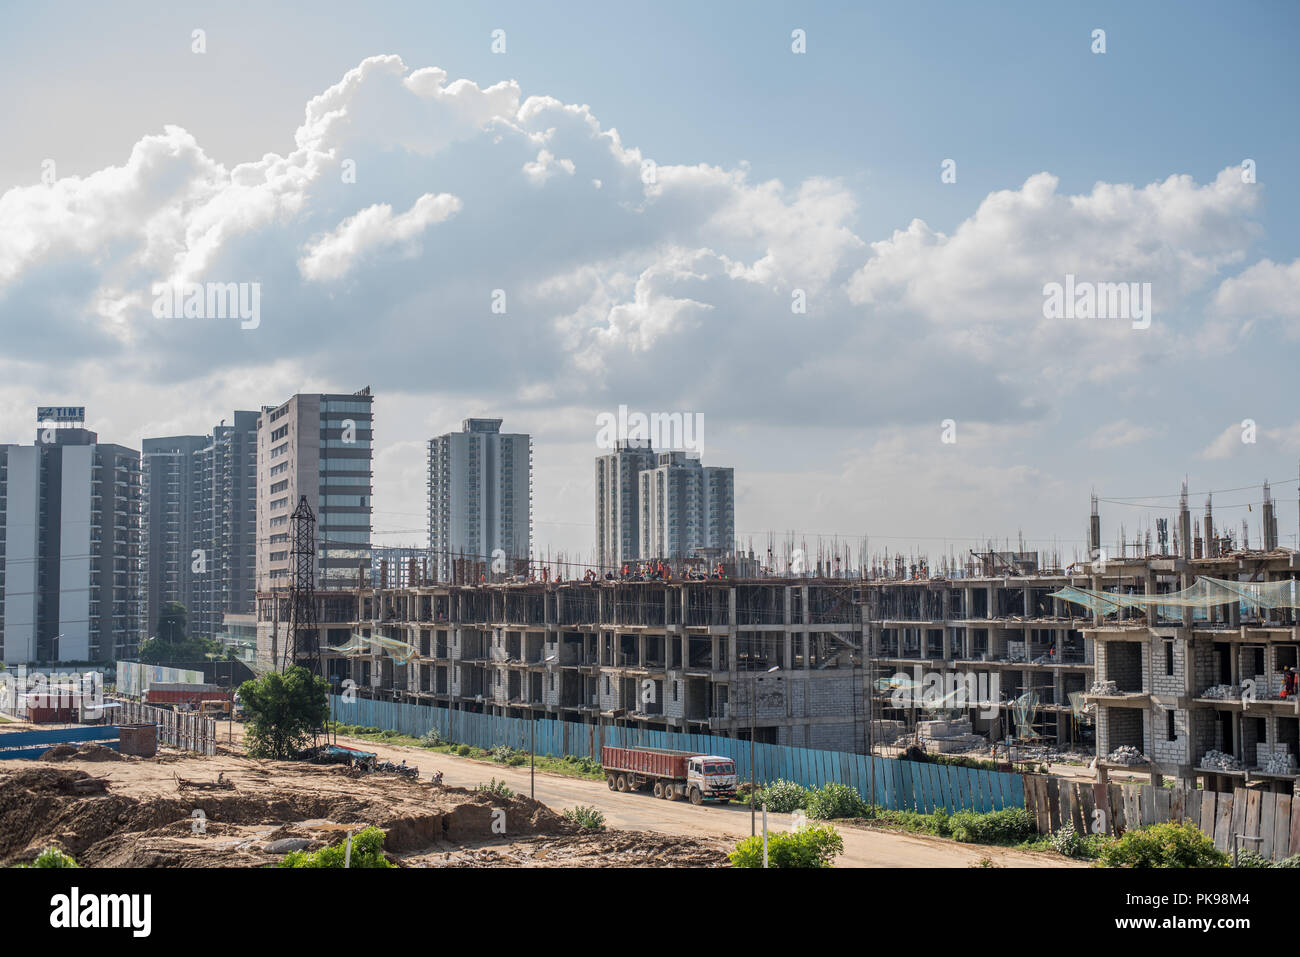 View of an urban construction site of a building. Stock Photo